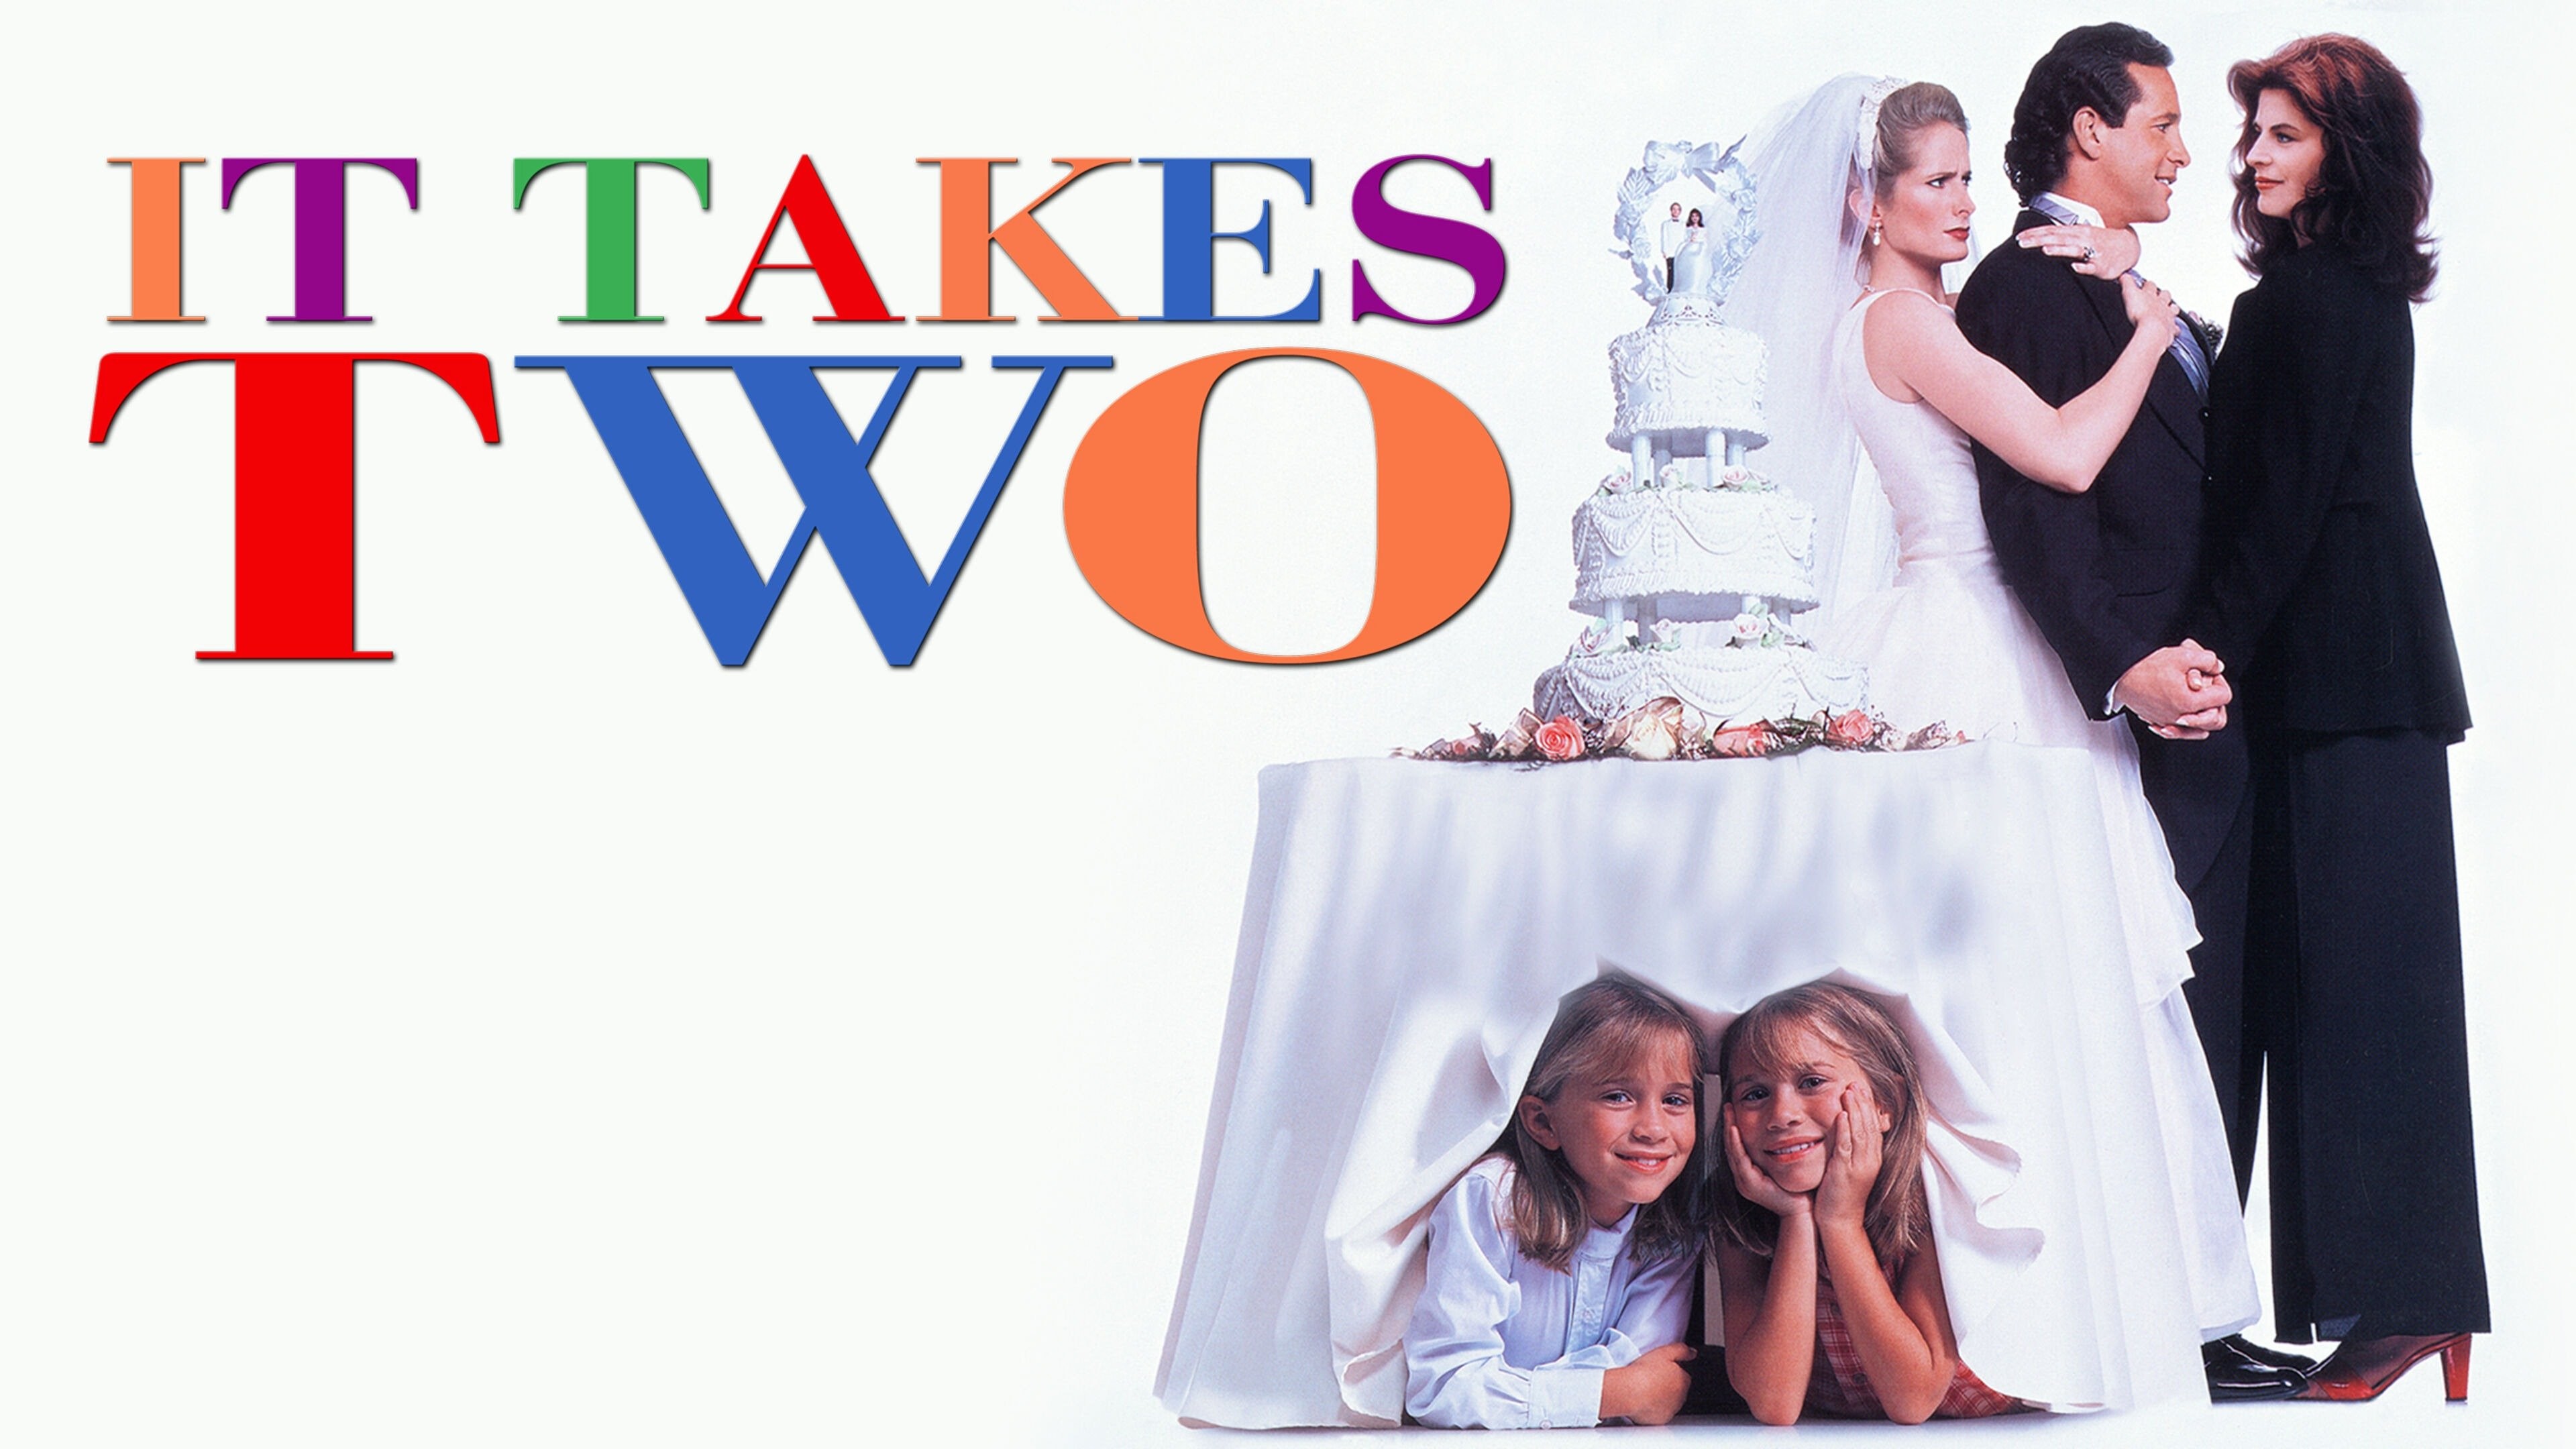 It Takes Two – Official Launch Trailer 